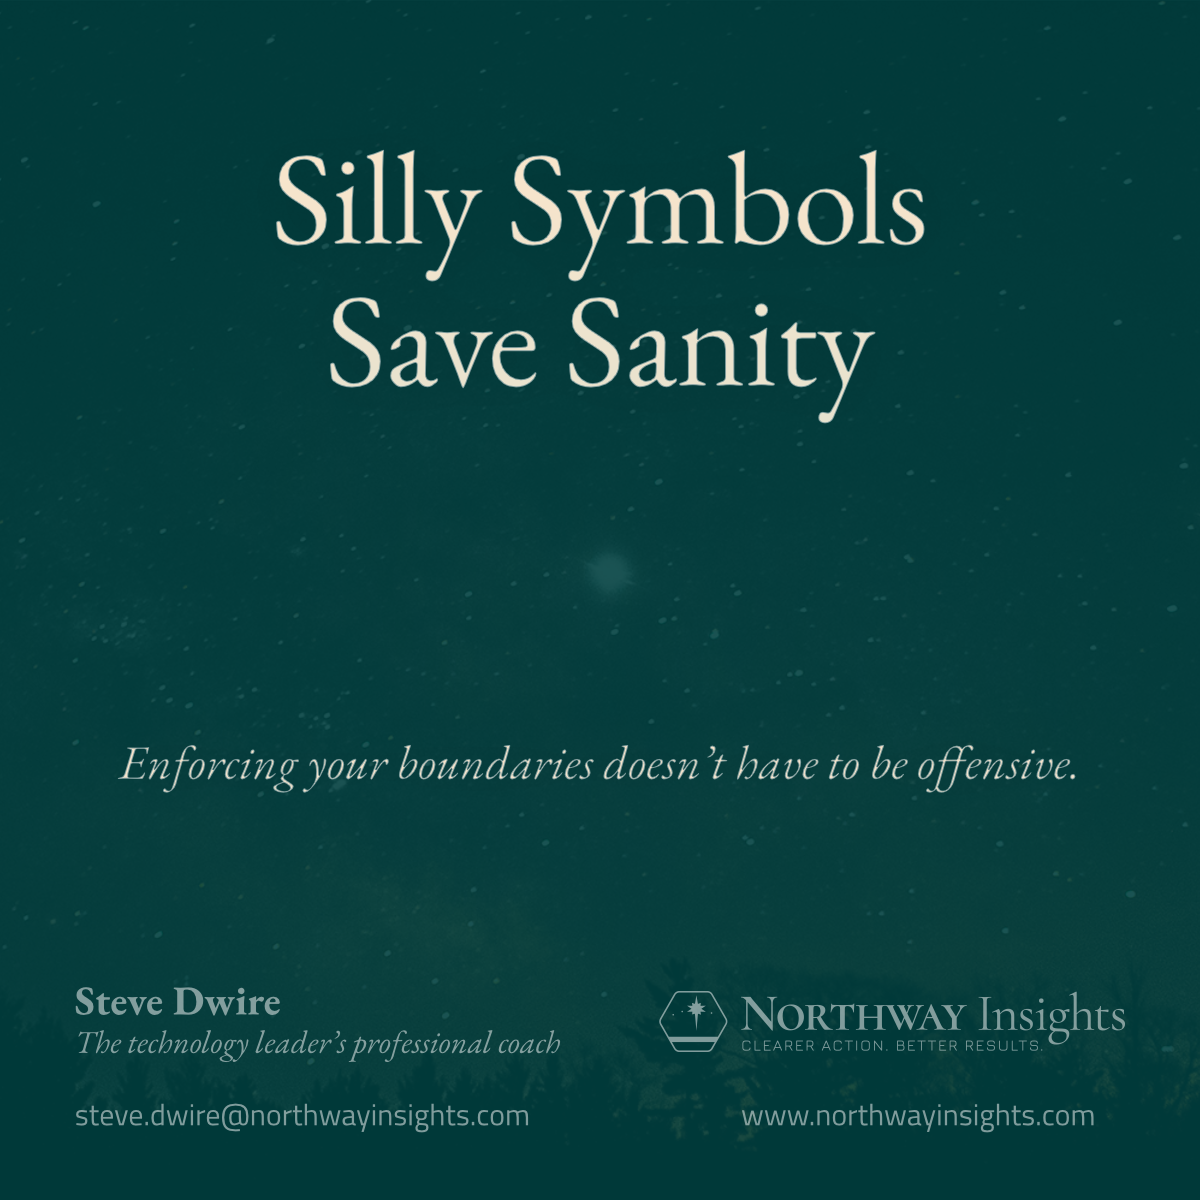 Silly Symbols Save Sanity (Enforcing your boundaries doesn't have to be offensive.)